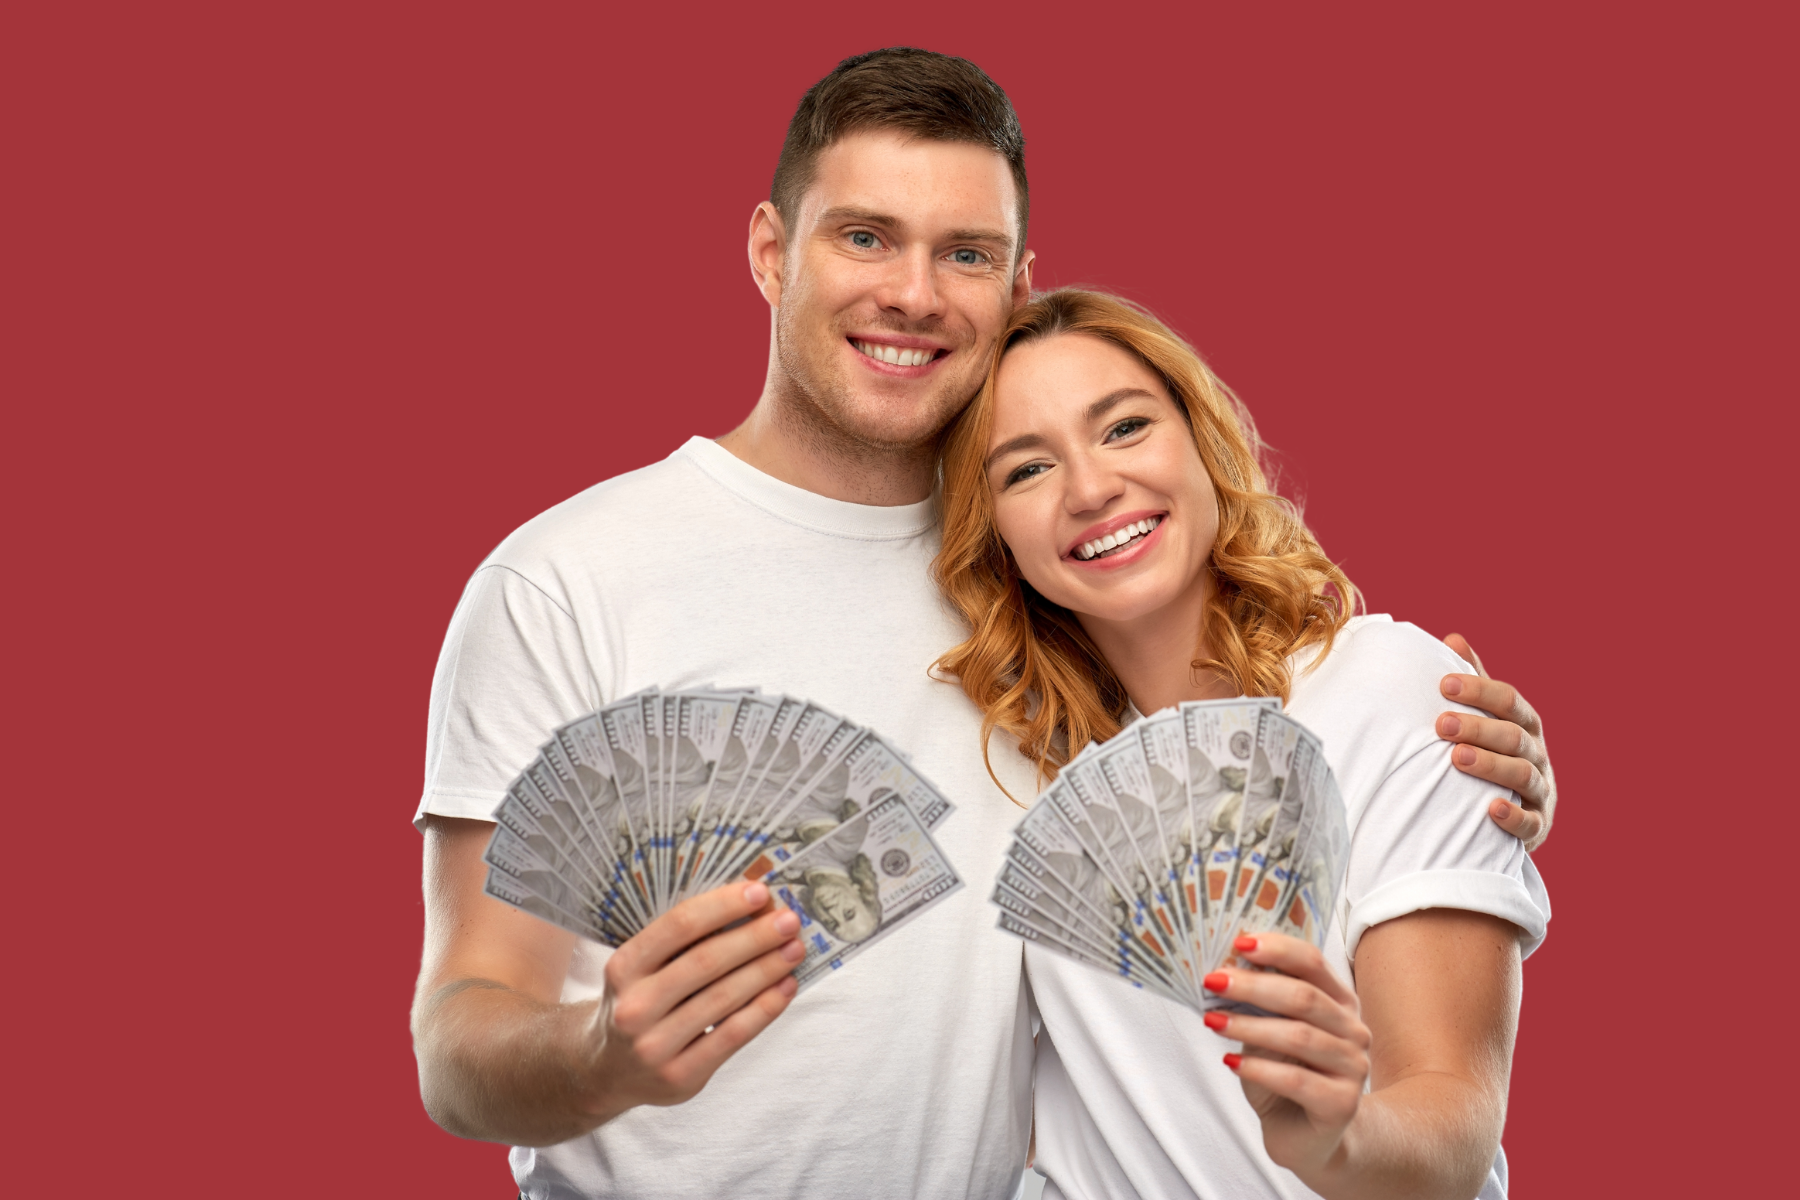 Young couple holding cash and smiling while hugging